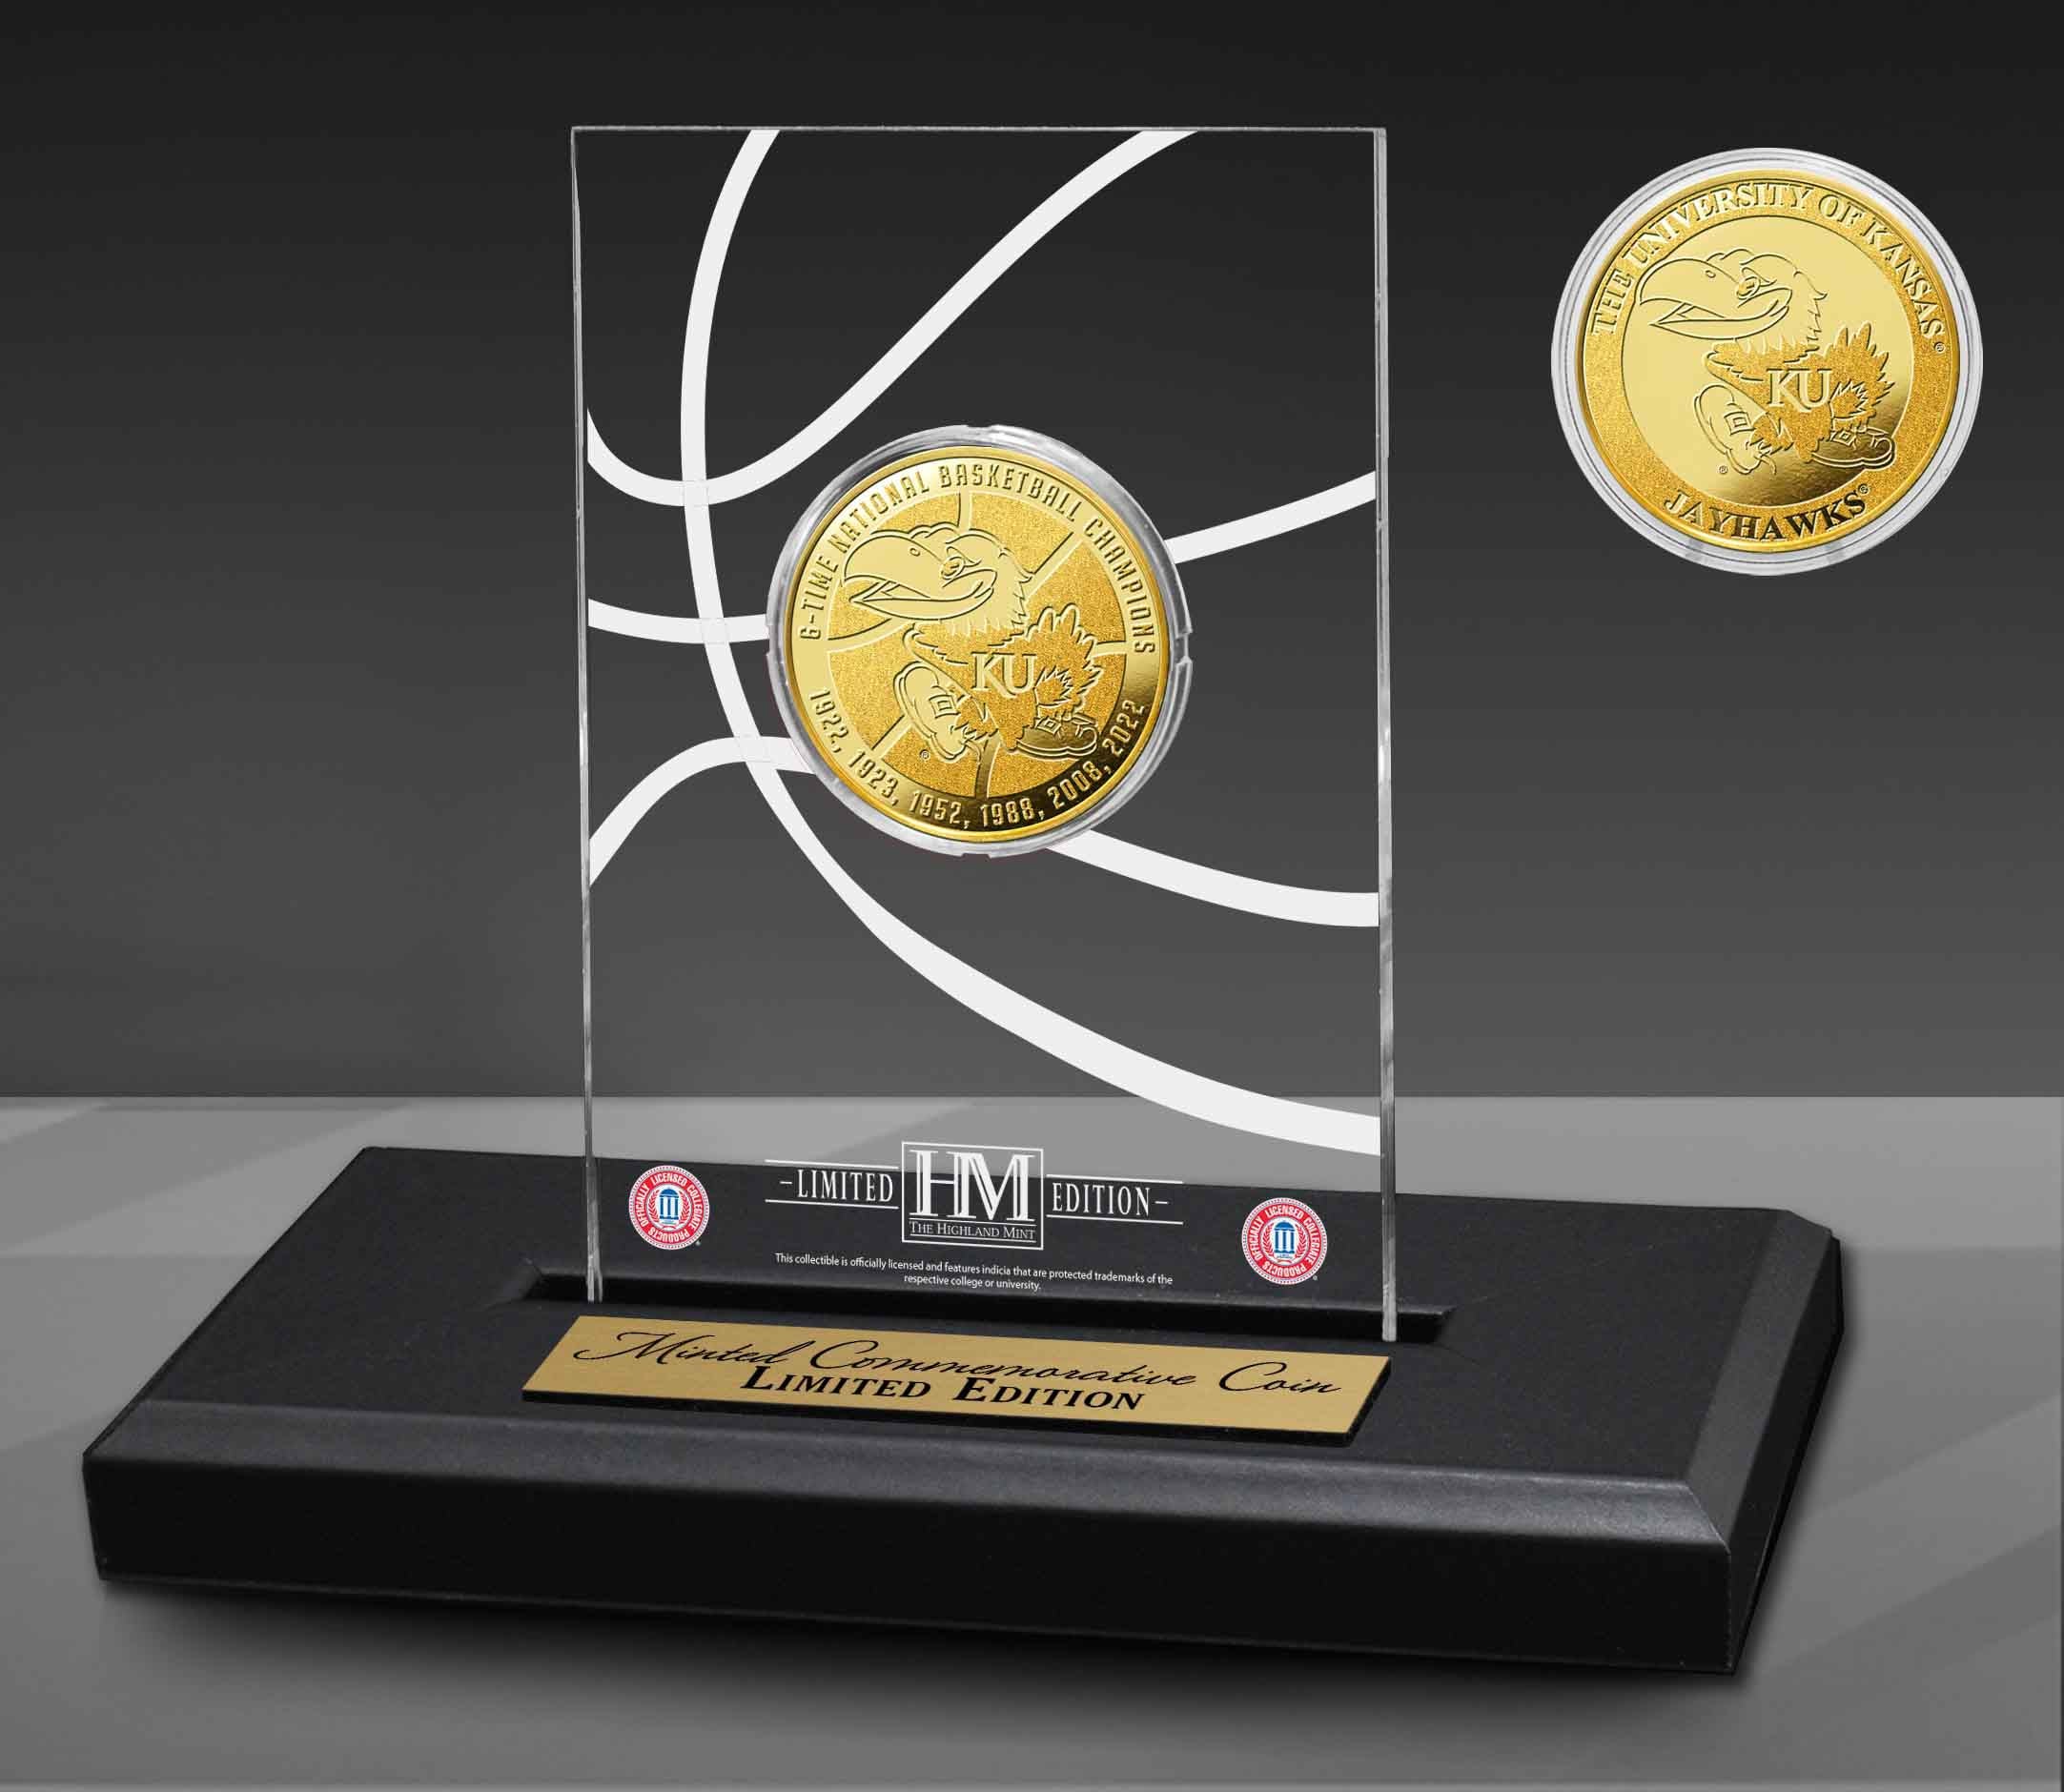 University Of Kansas Jayhawks Basketball 6-Time National Champions Gold Coin In Acrylic Display